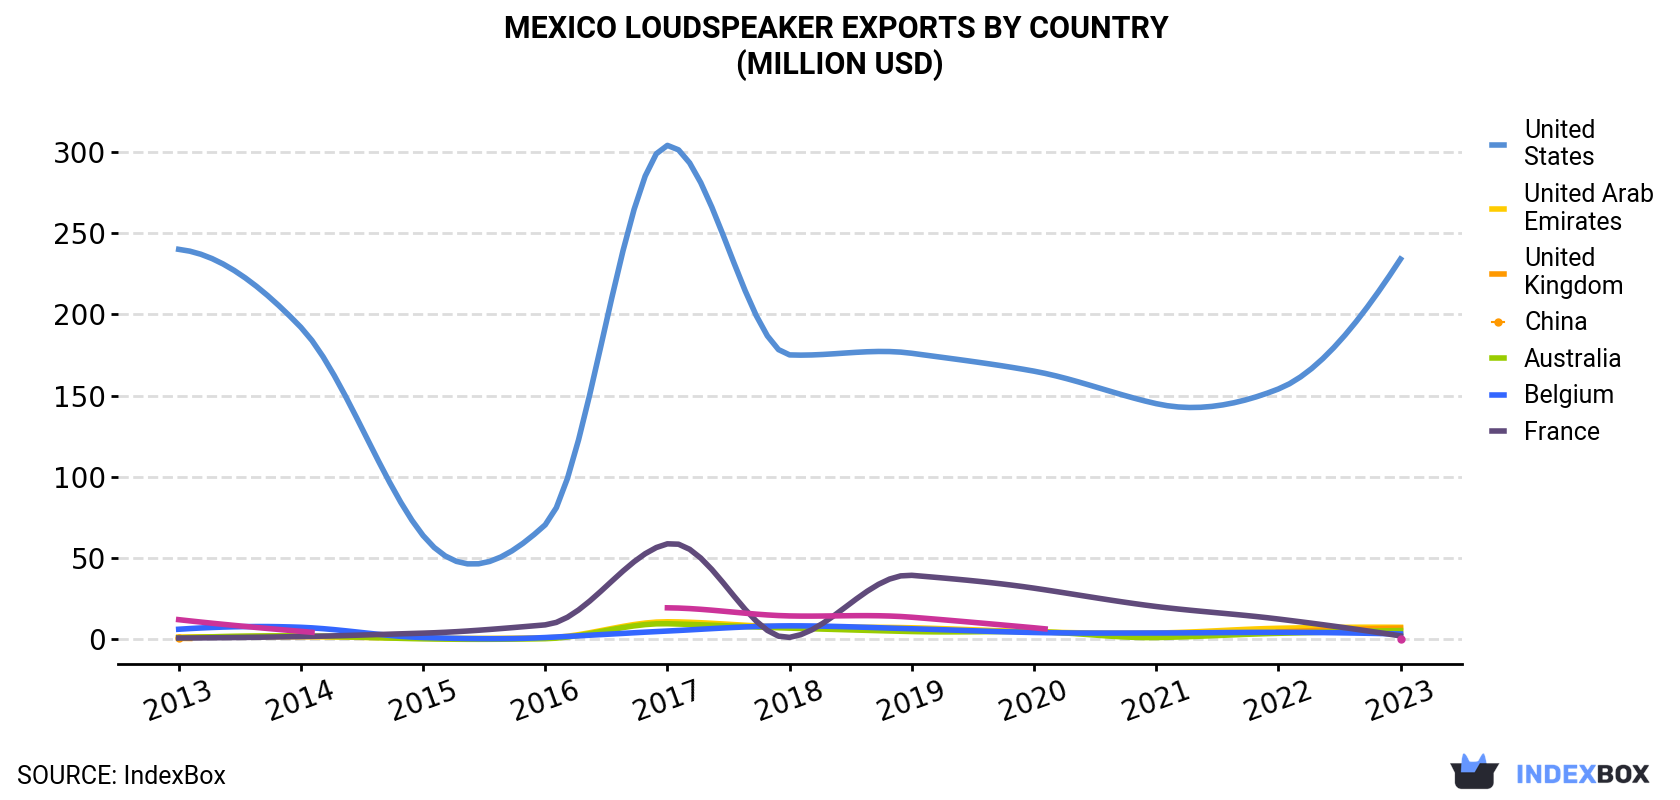 Mexico Loudspeaker Exports By Country (Million USD)